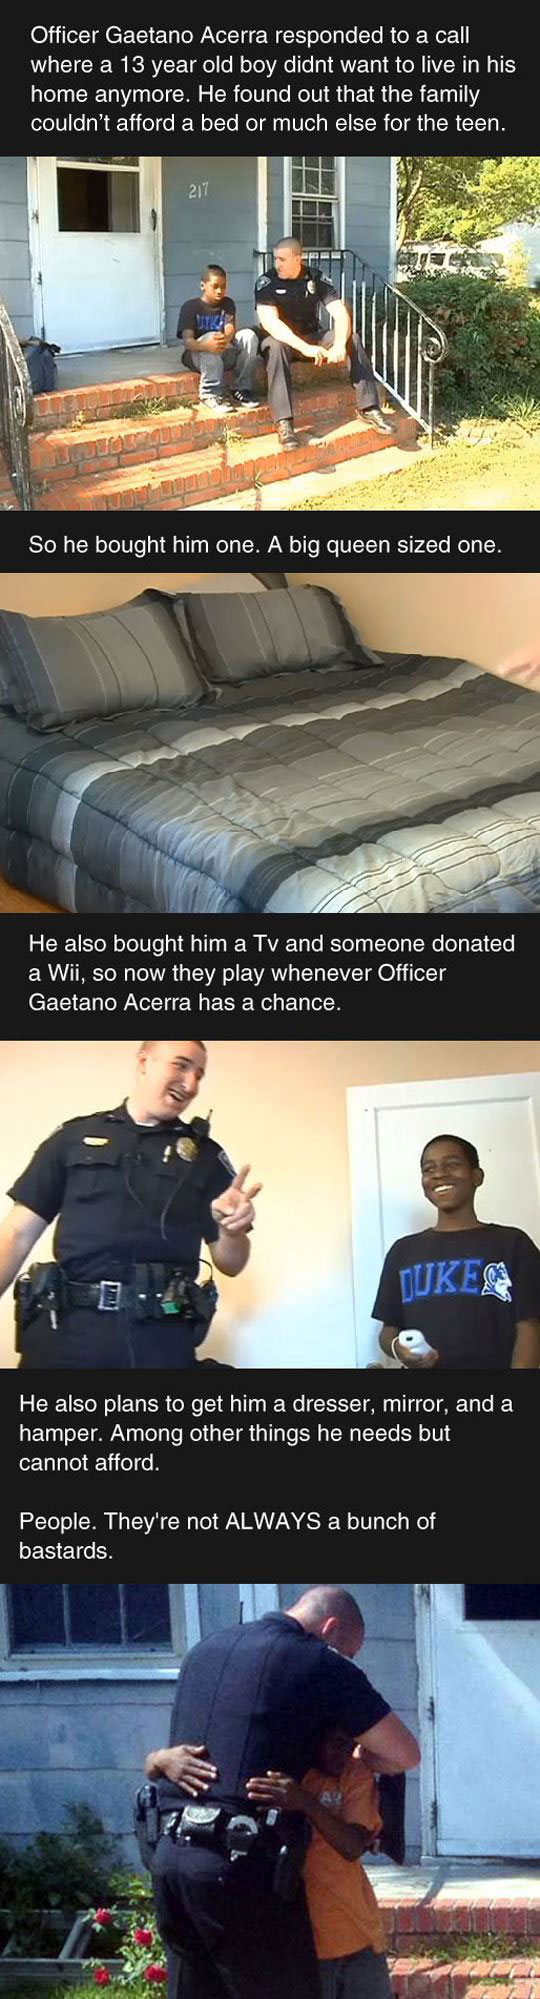 good guy cop, officer gaetano acerra responded to a call where a 13 year old boy didn't want to live in his home anymore, story